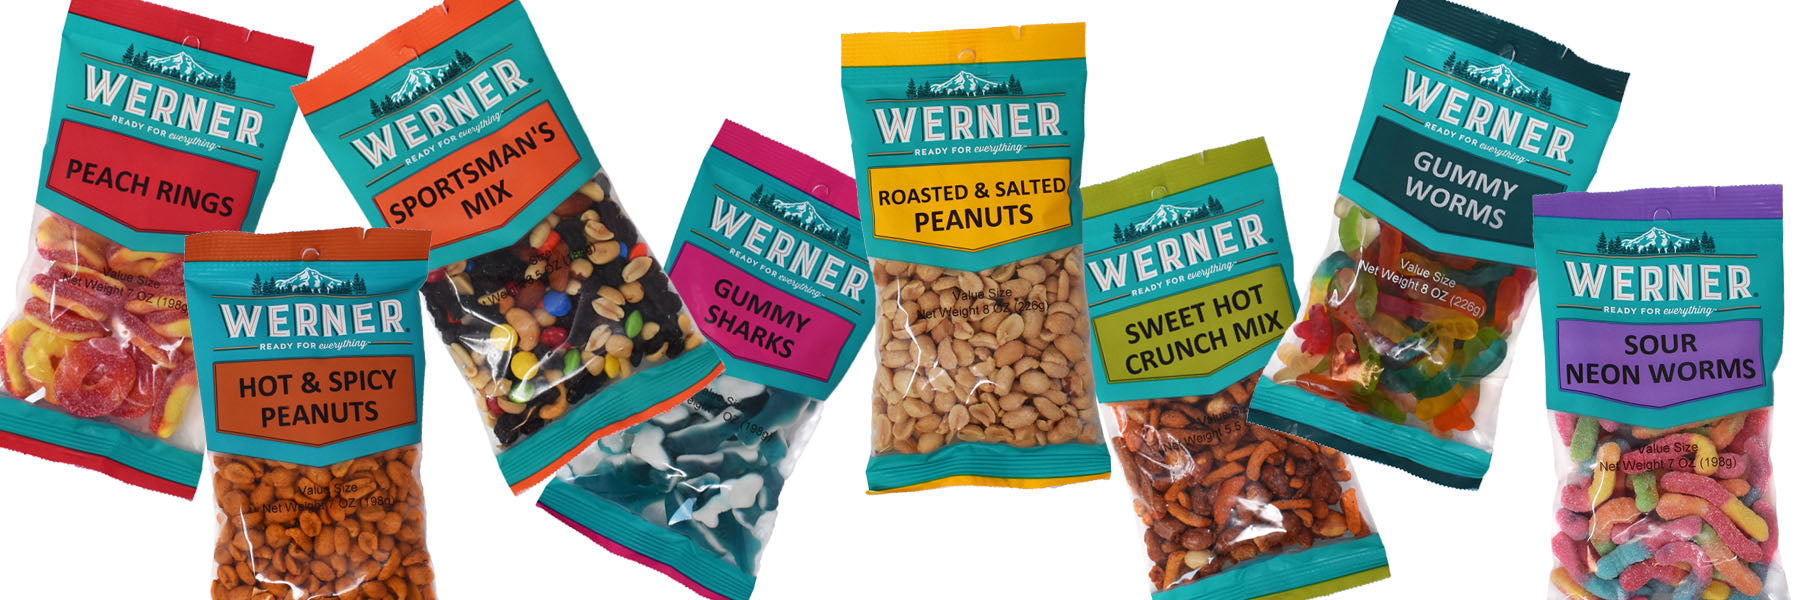 Werner Gourmet Meat Snacks Inc. Announces New Look for Snack Line Packaging